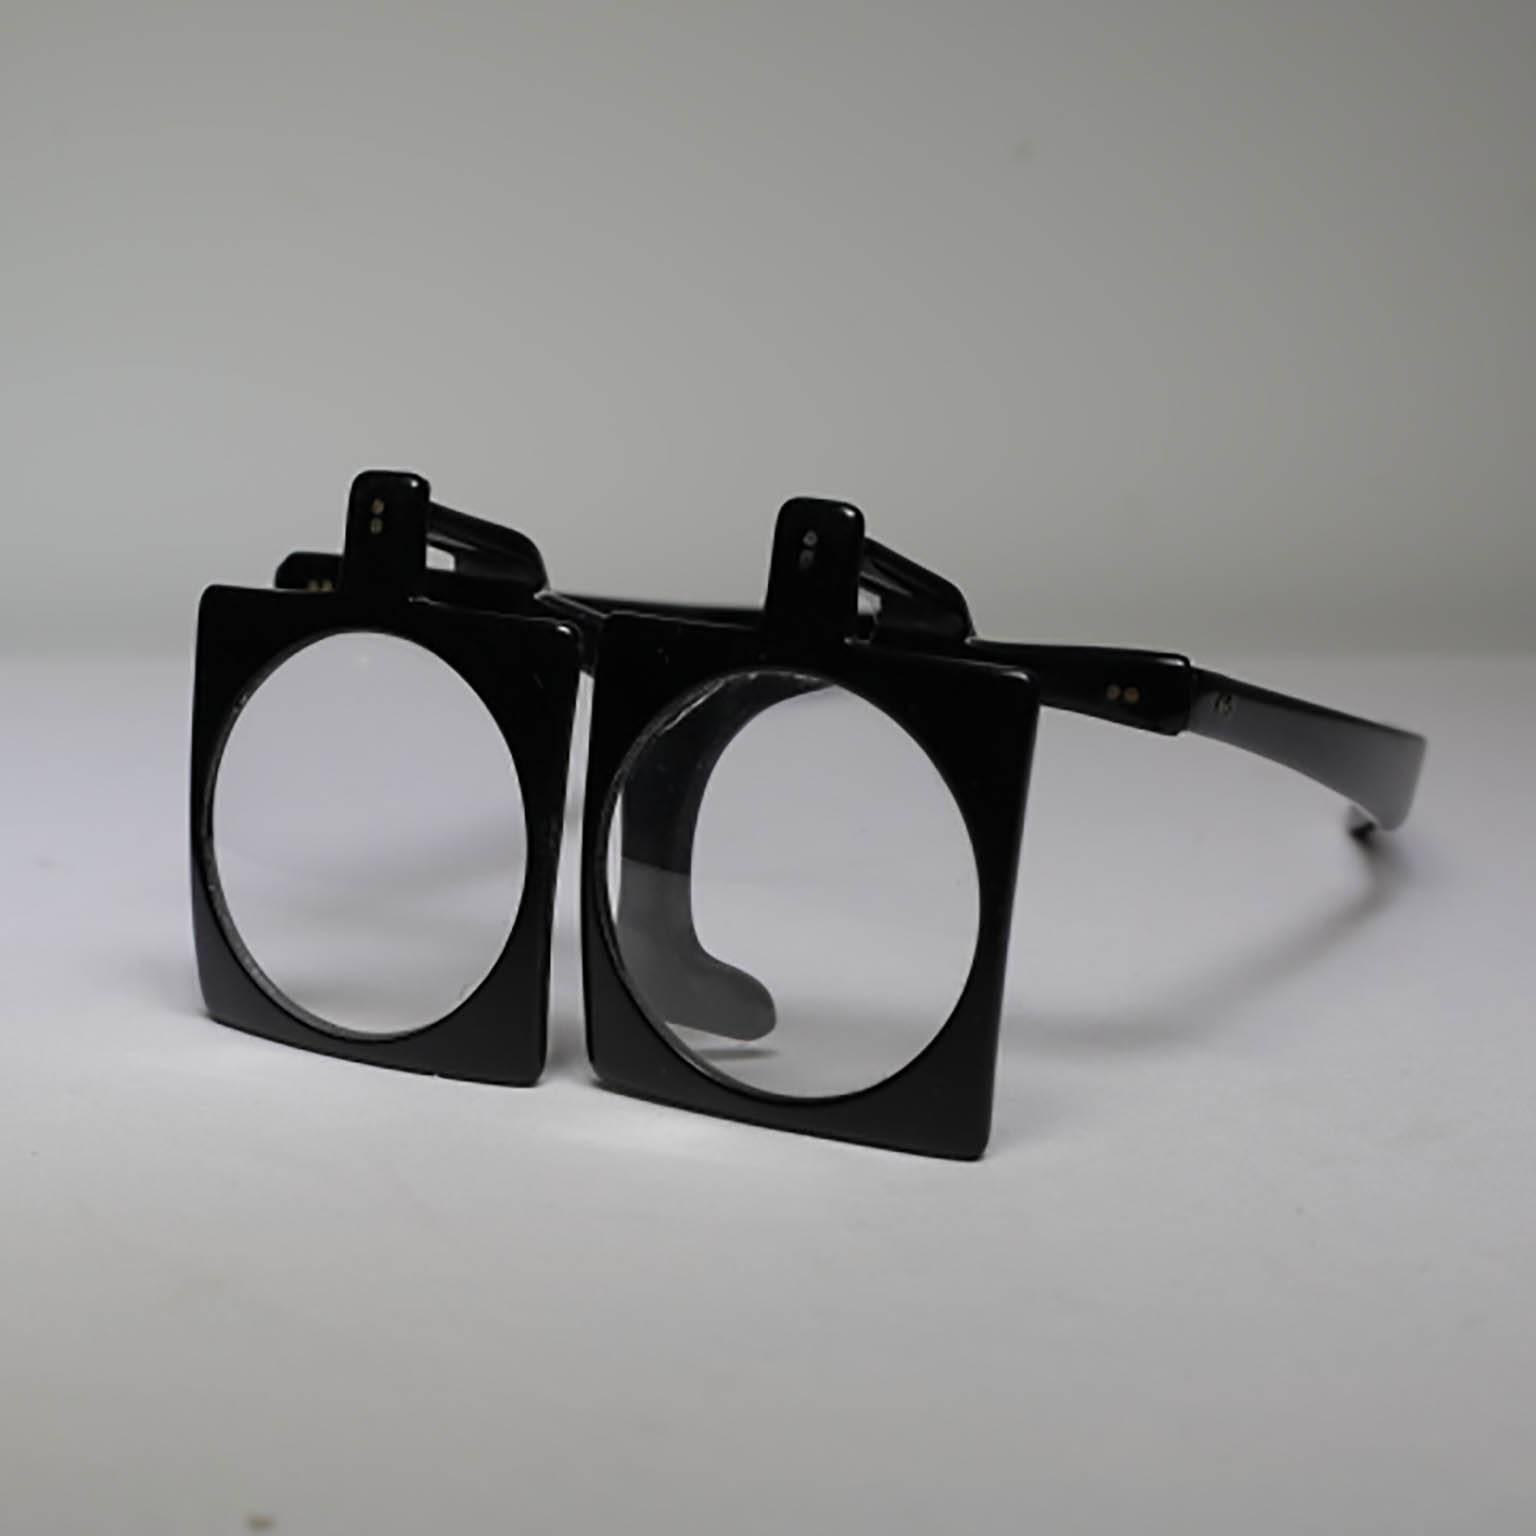 Pair of optometrist magnifying glasses. Each lens lifts up independently.
Amazing mounted on a steel stand for an unusual object on your coffee table or shelves.